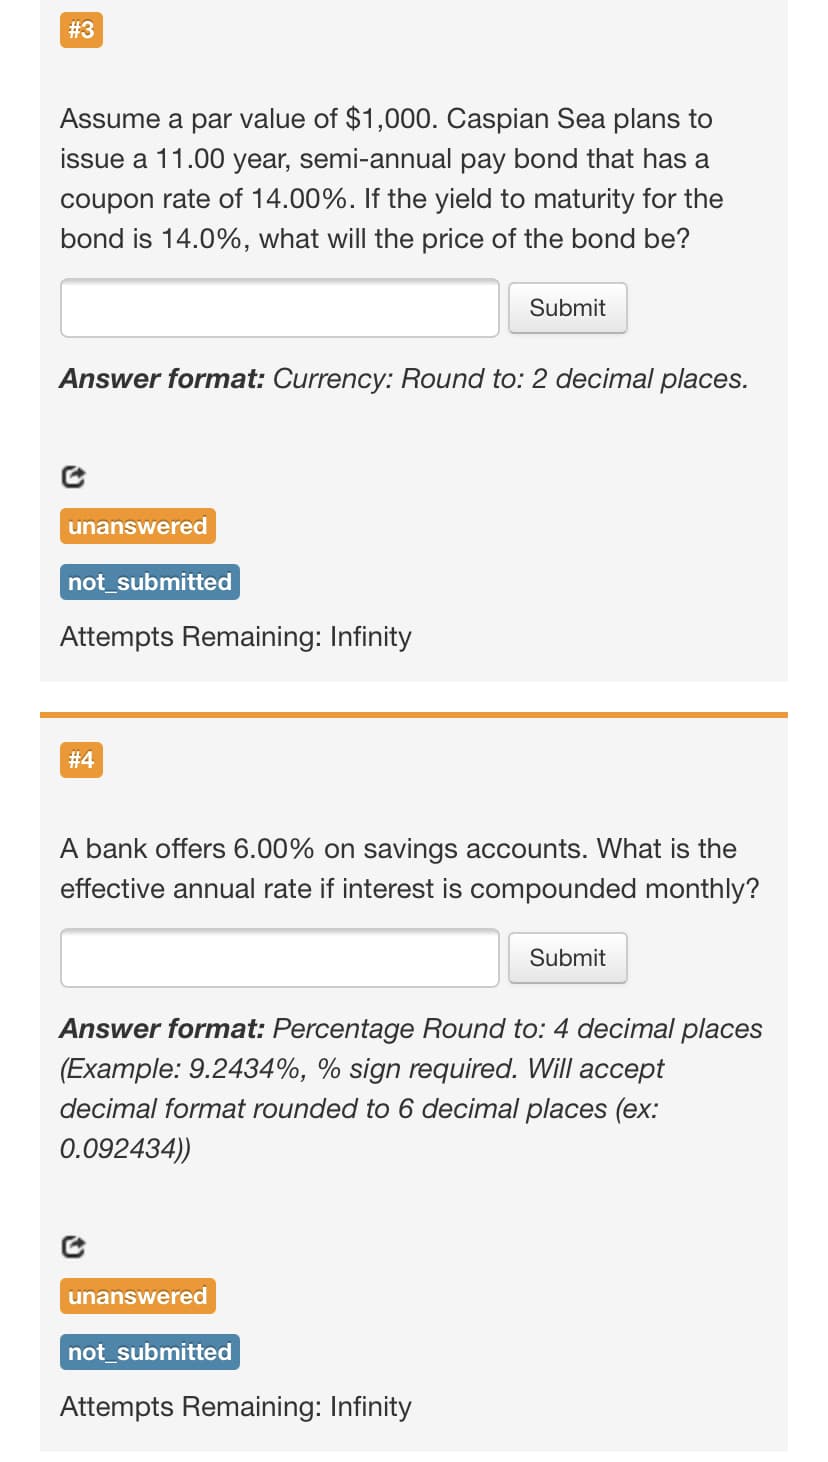 #3
Assume a par value of $1,000. Caspian Sea plans to
issue a 11.00 year, semi-annual pay bond that has a
coupon rate of 14.00%. If the yield to maturity for the
bond is 14.0%, what will the price of the bond be?
Submit
Answer format: Currency: Round to: 2 decimal places.
unanswered
not_submitted
Attempts Remaining: Infinity
# 4
A bank offers 6.00% on savings accounts. What is the
effective annual rate if interest is compounded monthly?
Submit
Answer format: Percentage Round to: 4 decimal places
(Example: 9.2434%, % sign required. Will accept
decimal format rounded to 6 decimal places (ex:
0.092434))
unanswered
not_submitted
Attempts Remaining: Infinity
